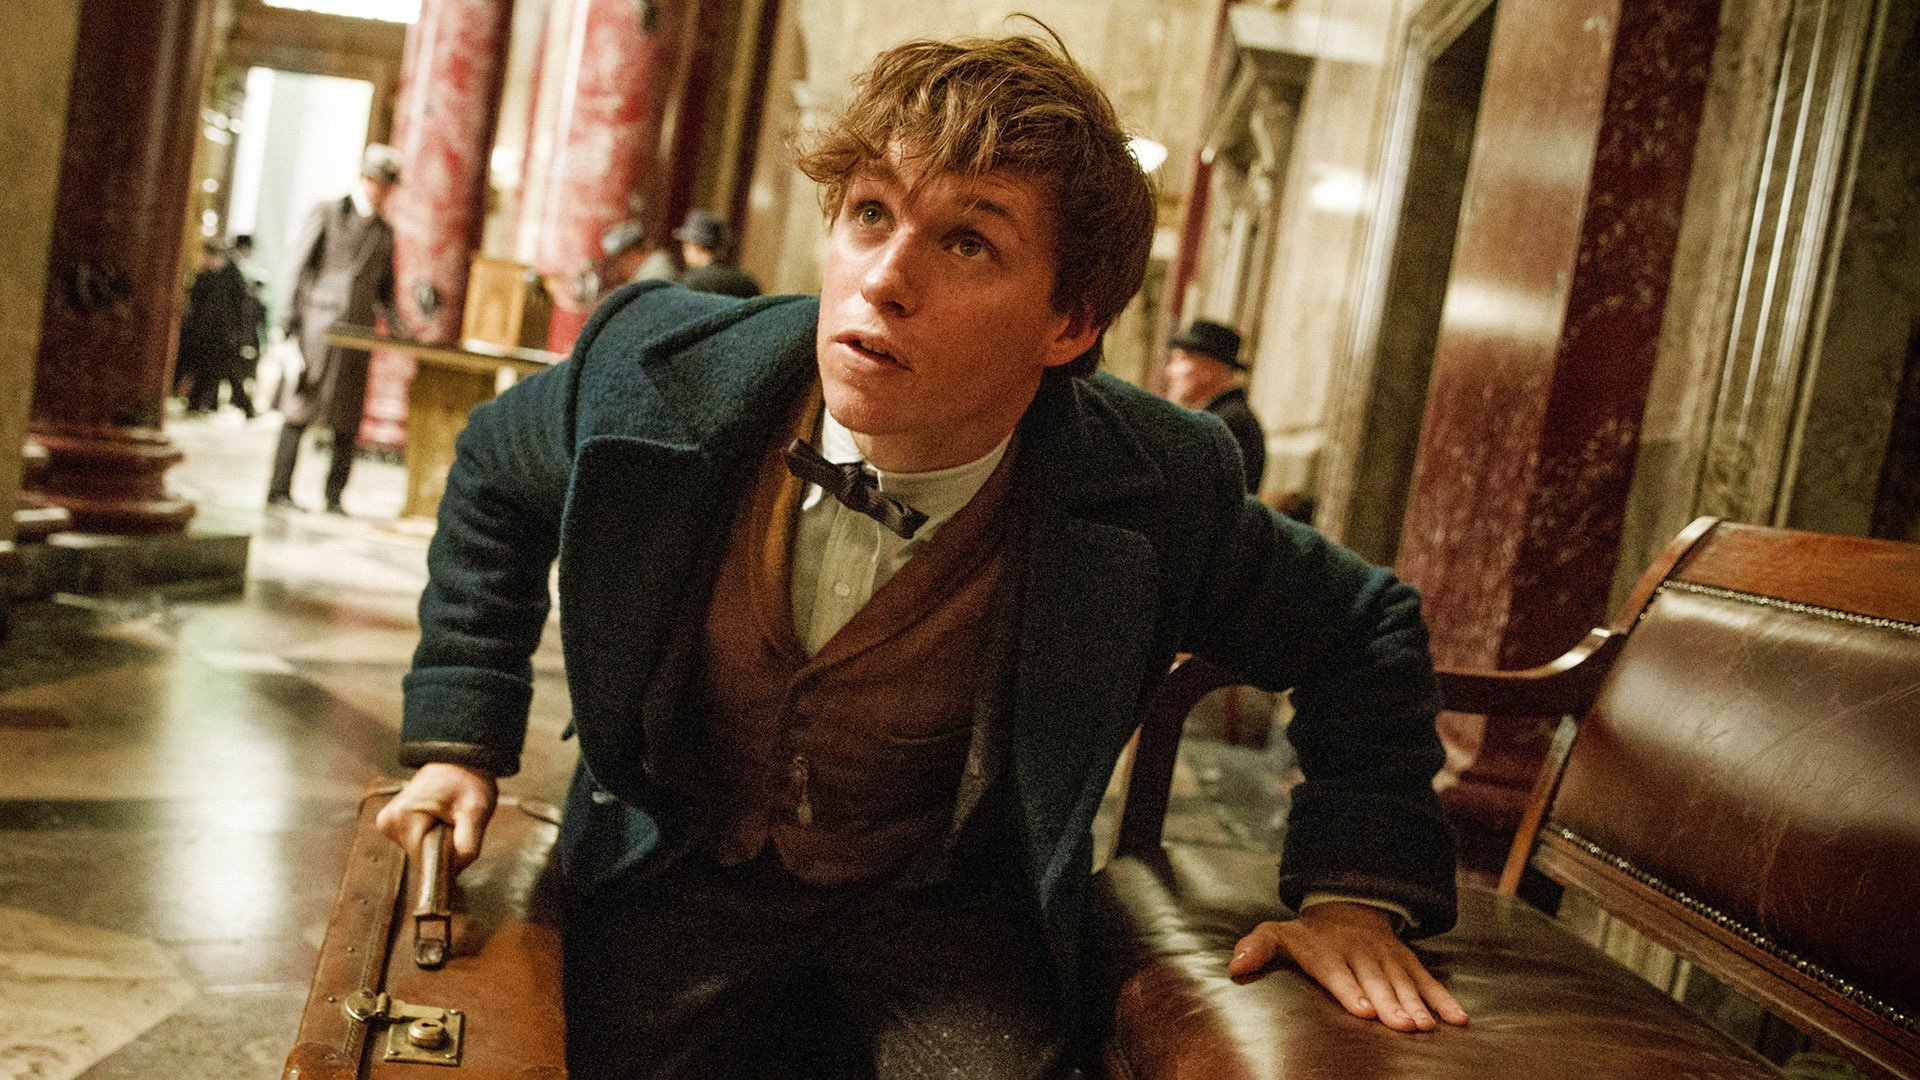 David Yates Confirms What We Already Suspected About Fantastic Beasts